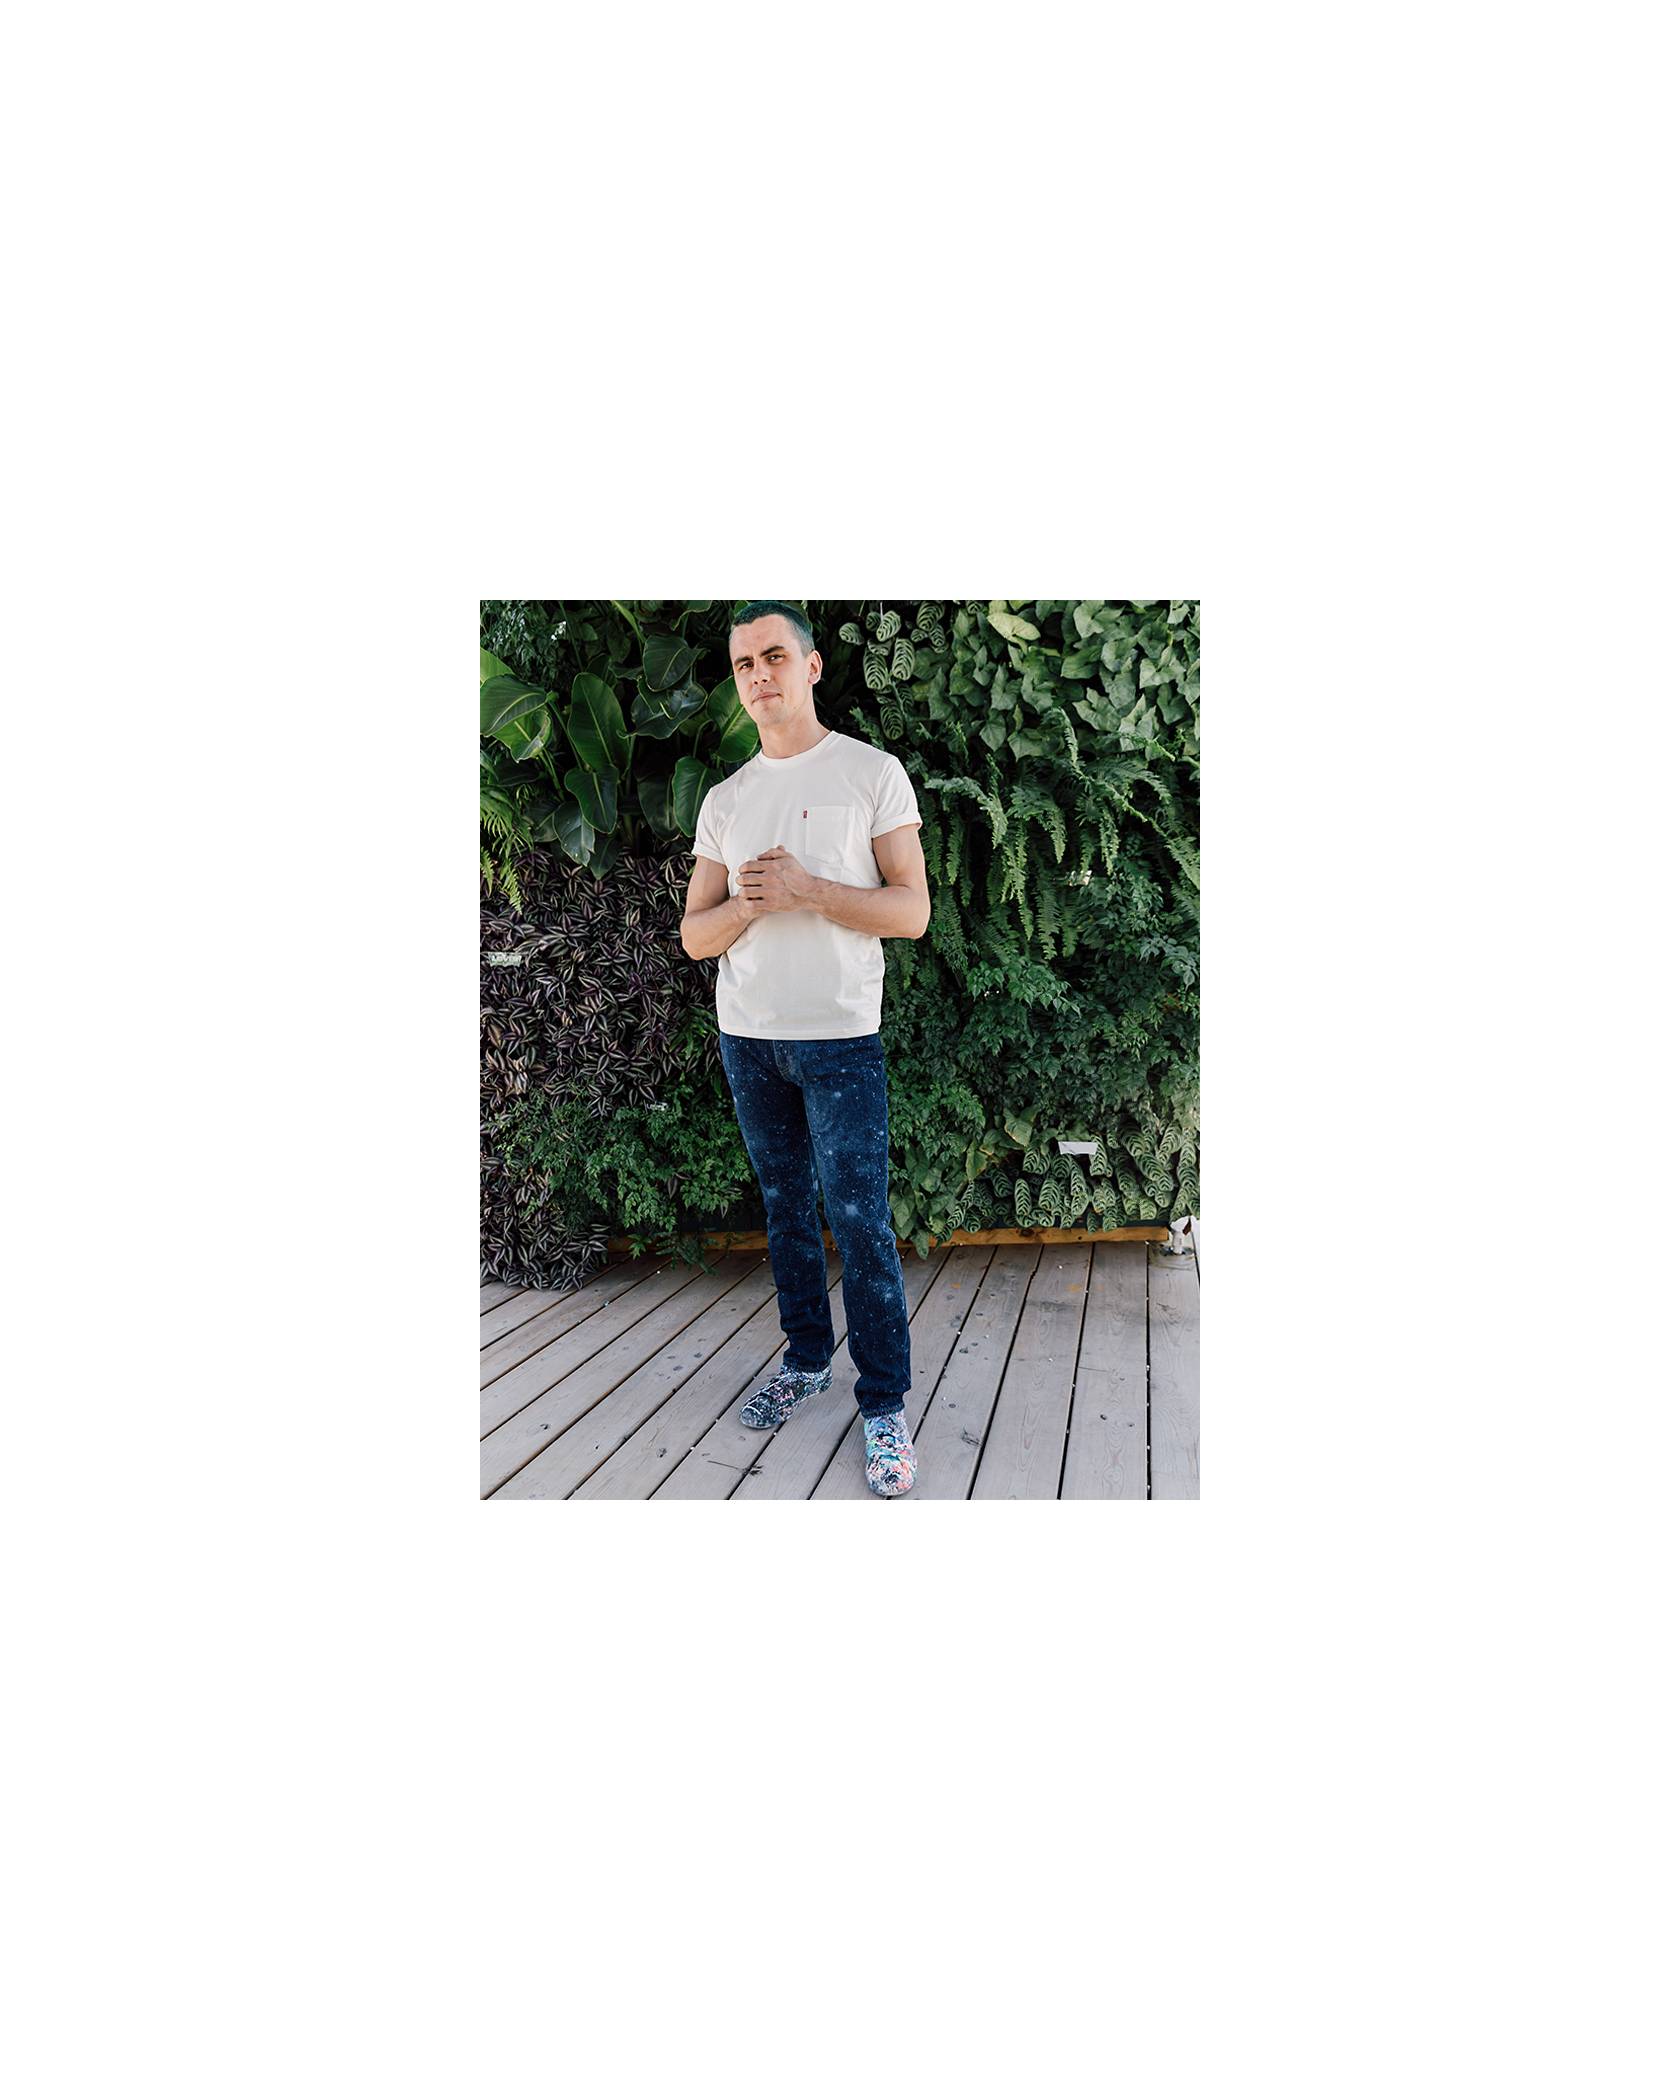 Callen Schaub standing in front of a wall of plants, rocking his pair of Levi's® Future Finish dark wash jeans and an off-white colored Levi's® tee shirt with his hands in front of him.